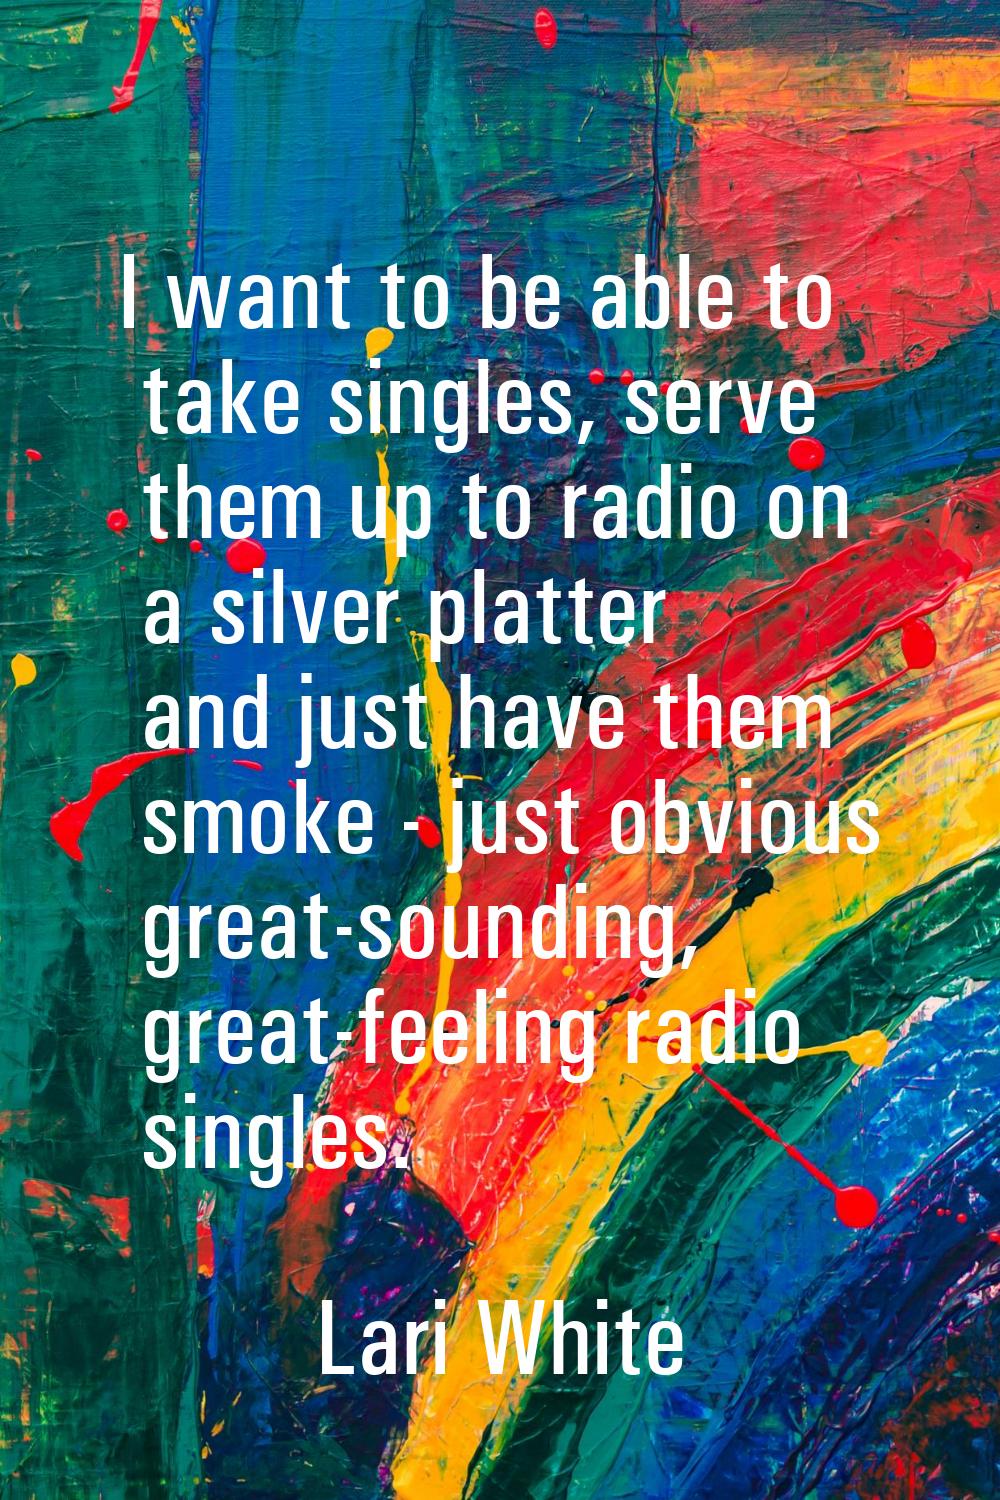 I want to be able to take singles, serve them up to radio on a silver platter and just have them sm